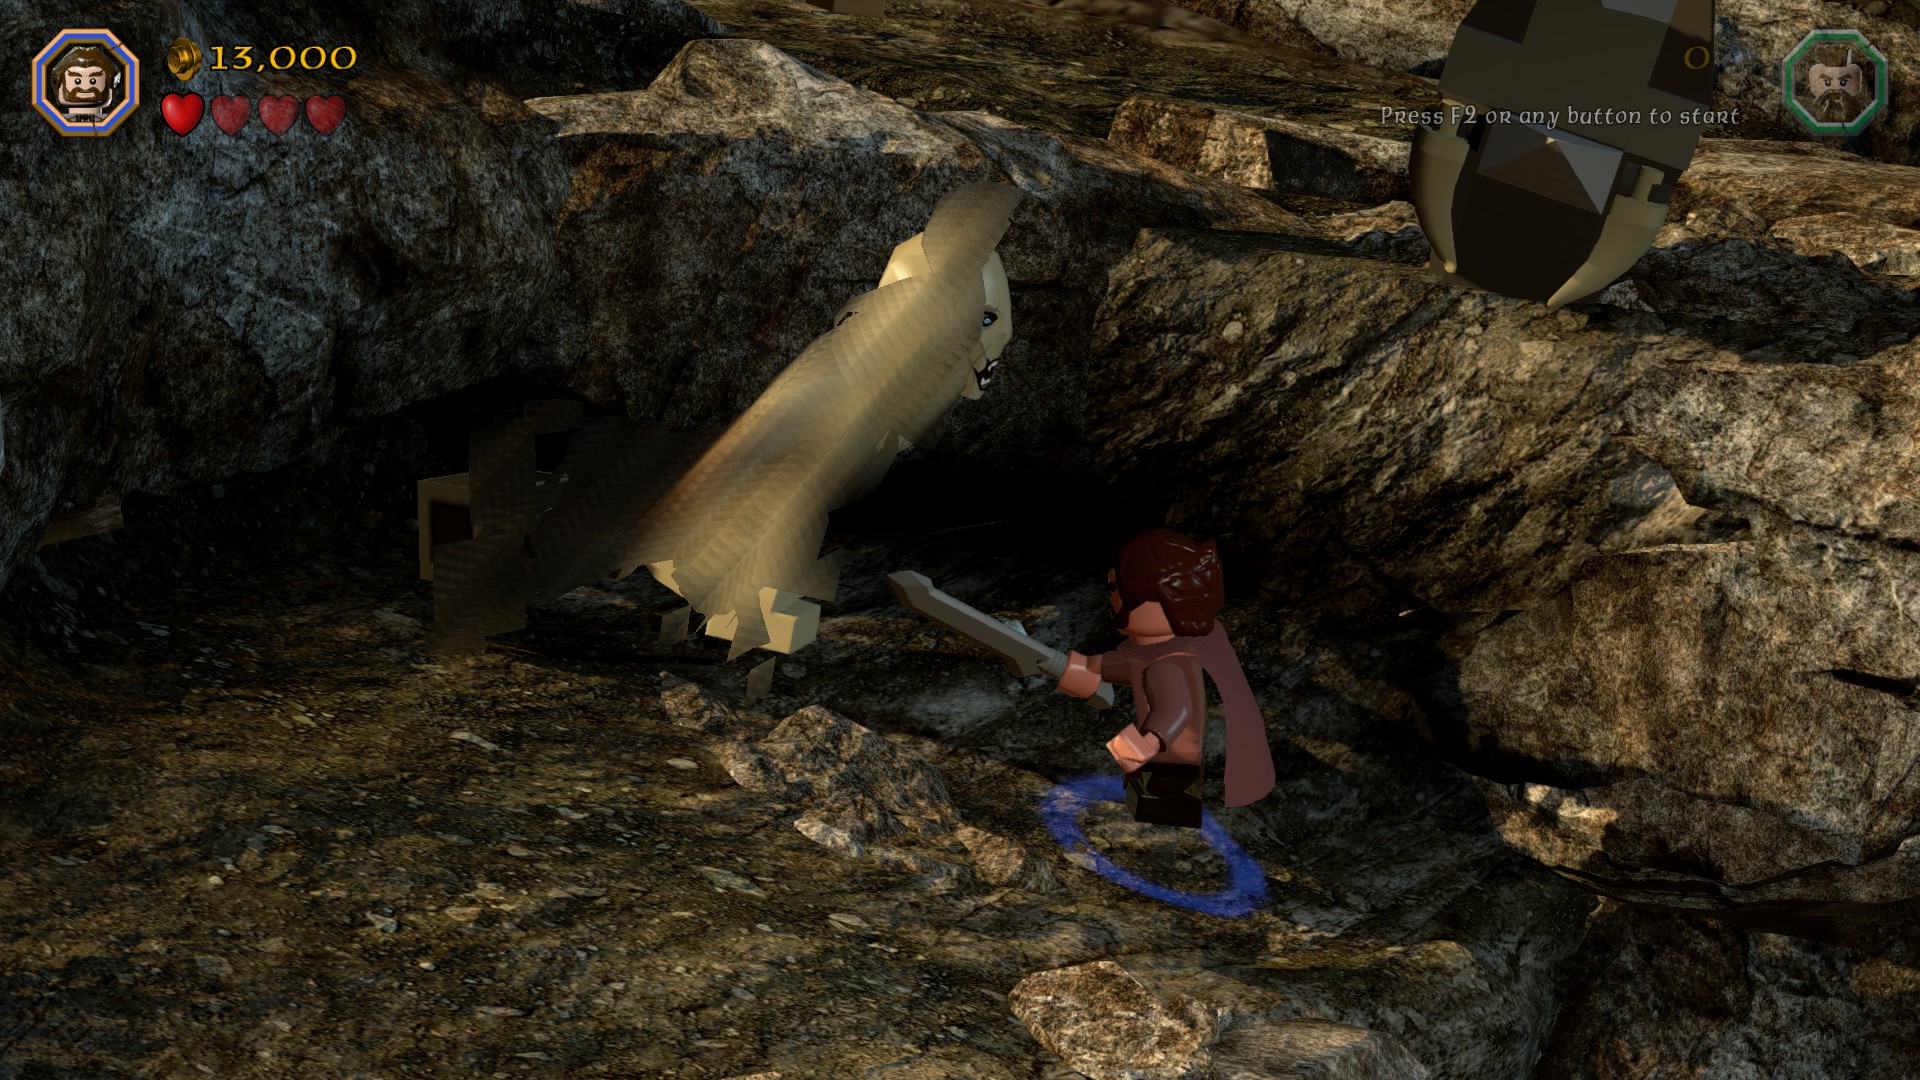 download lego hobbit lonely mountain for free